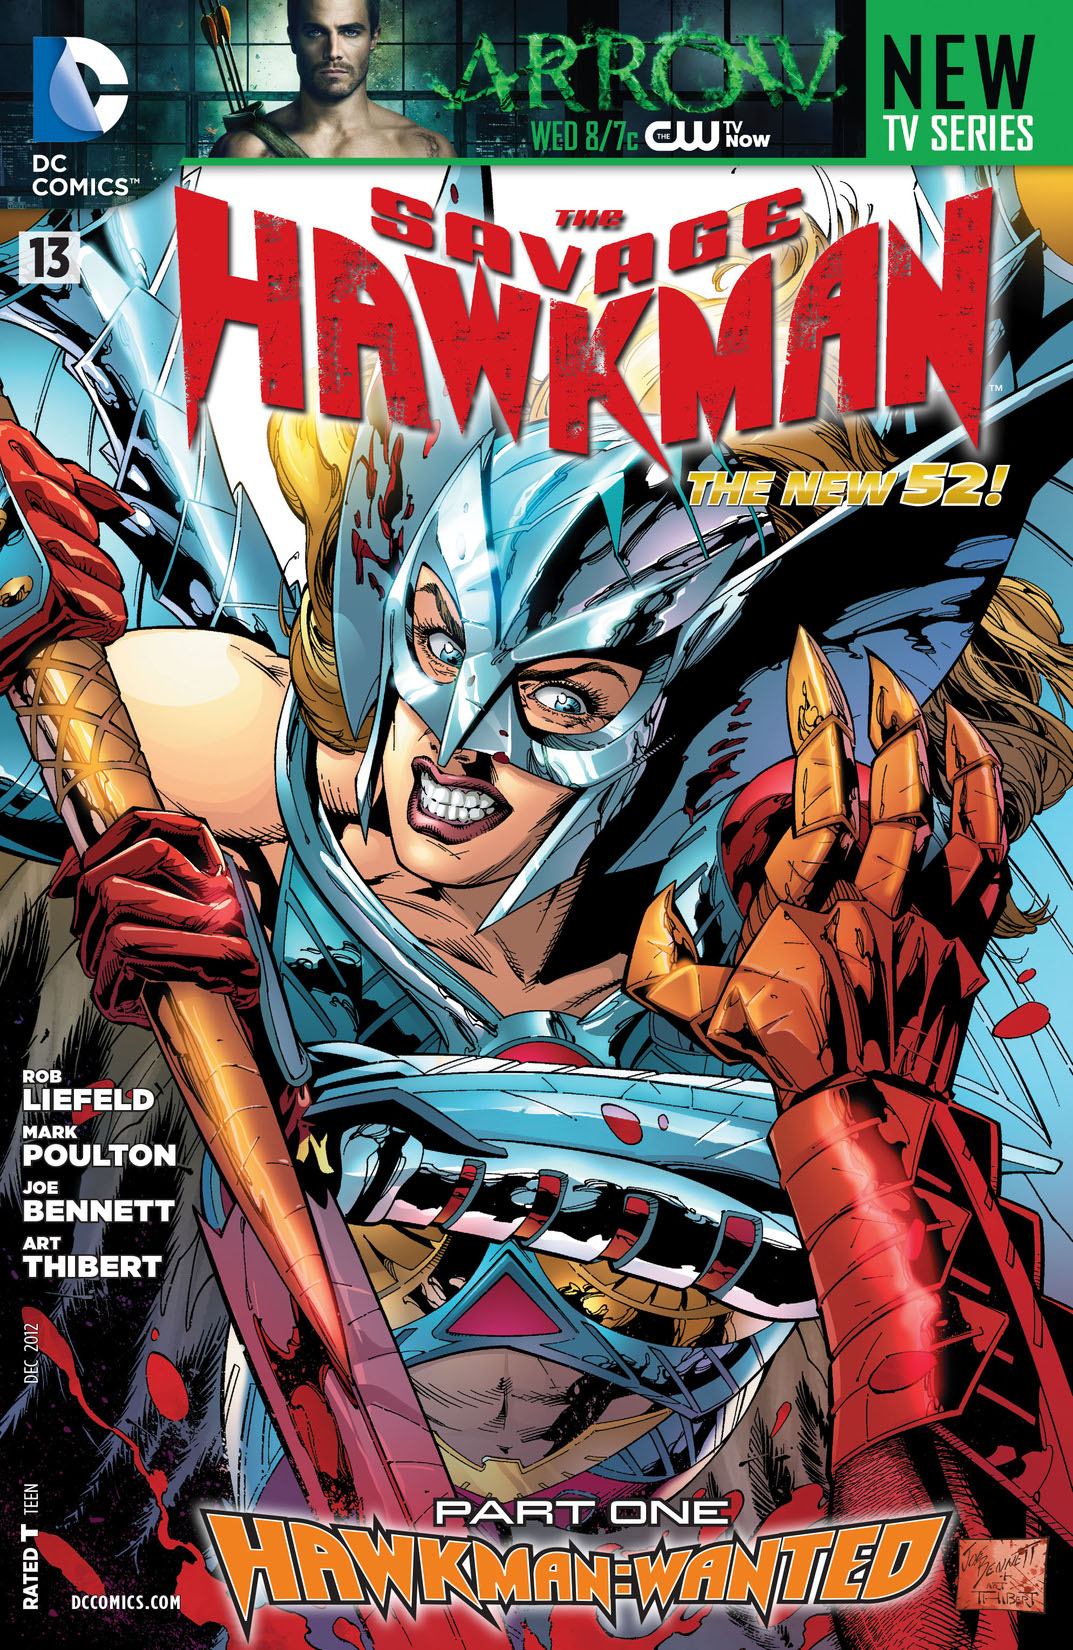 The Savage Hawkman #13 preview images